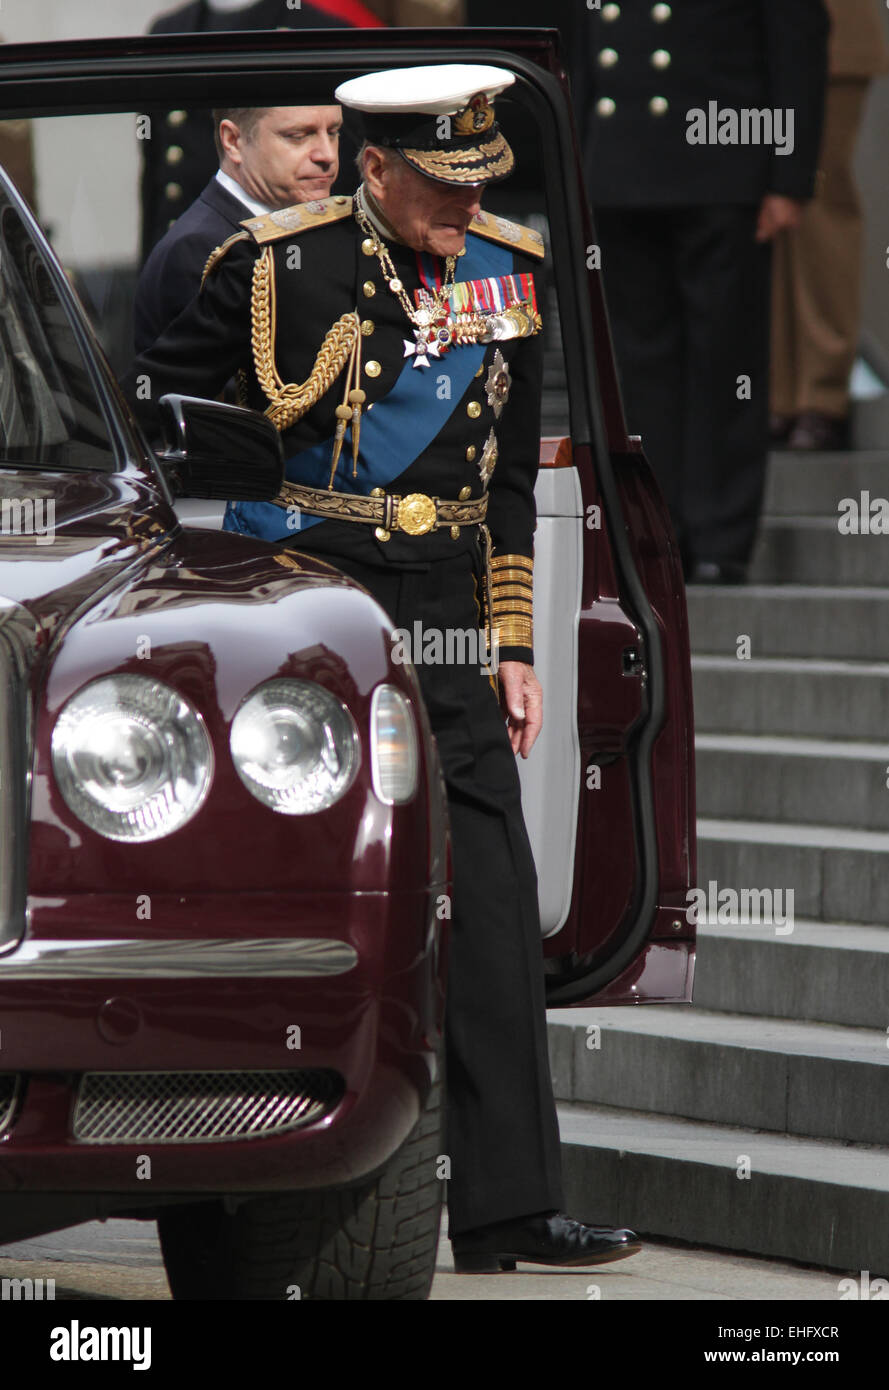 London, UK. 13th March, 2015. Prince Philip, Duke of Edinburgh and Queen Elizabeth II attend a Service of Commemoration for troops who were stationed in Afghanistan at St Paul's Cathedral Credit:  Simon James/Alamy Live News Stock Photo